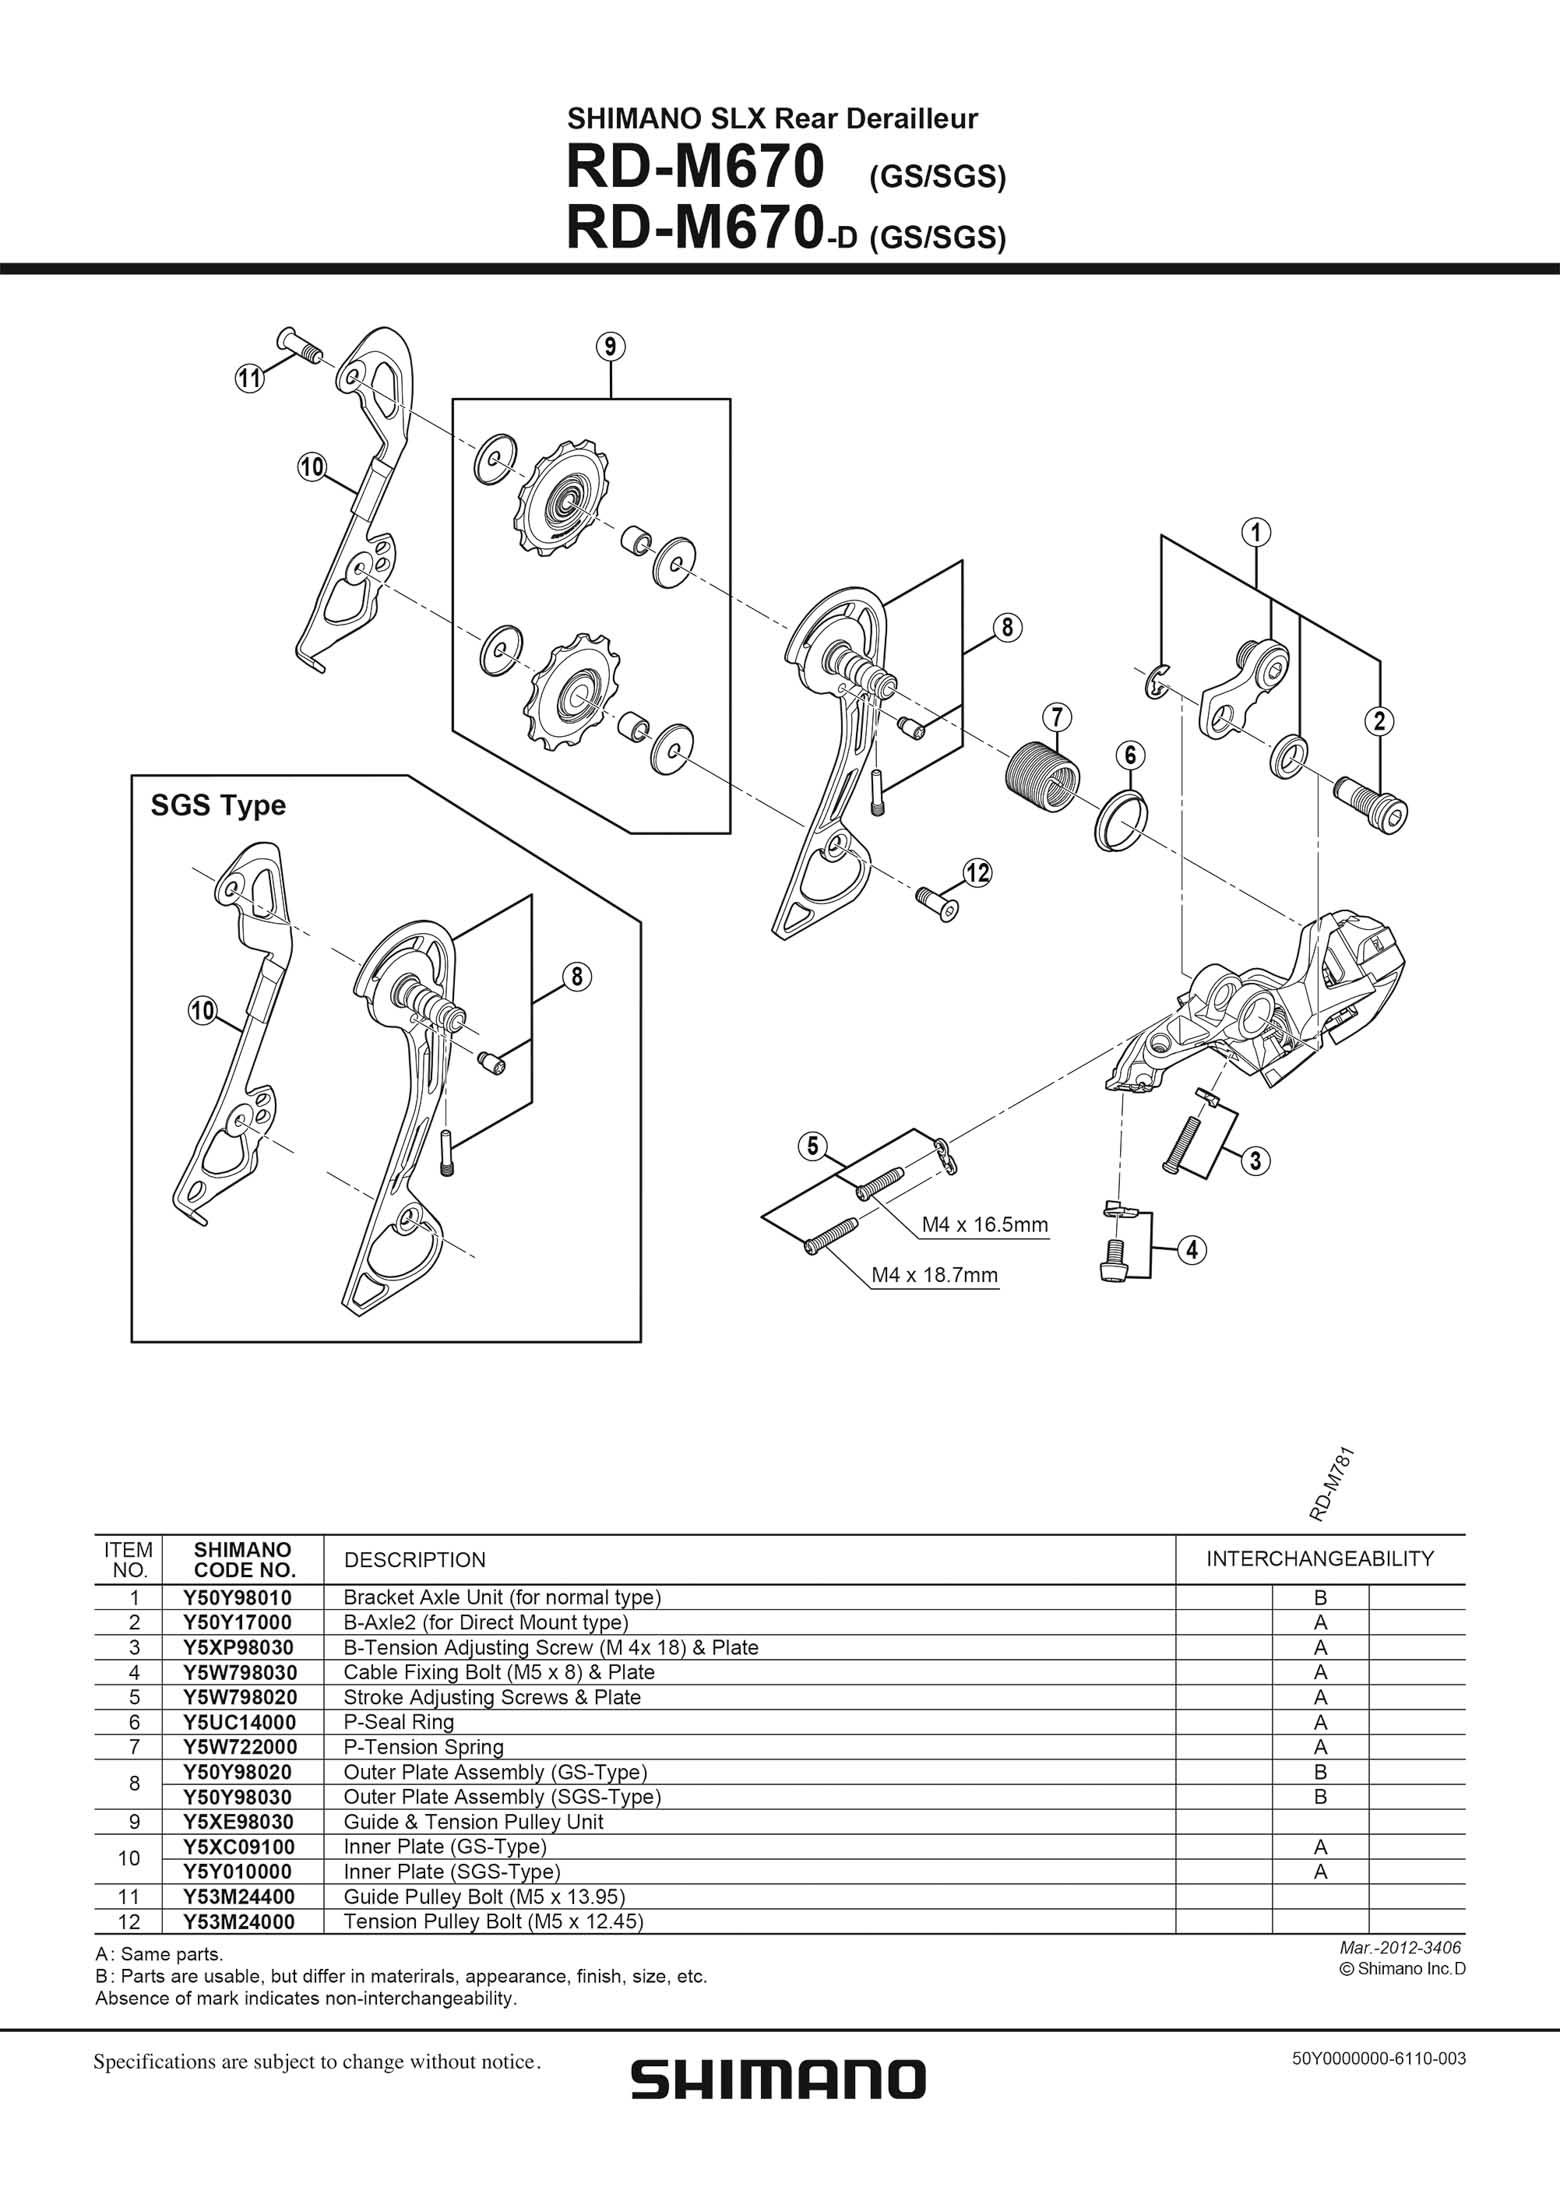 Shimano web site 2020 - exploded views from 2012 SLX (M670 series) main image